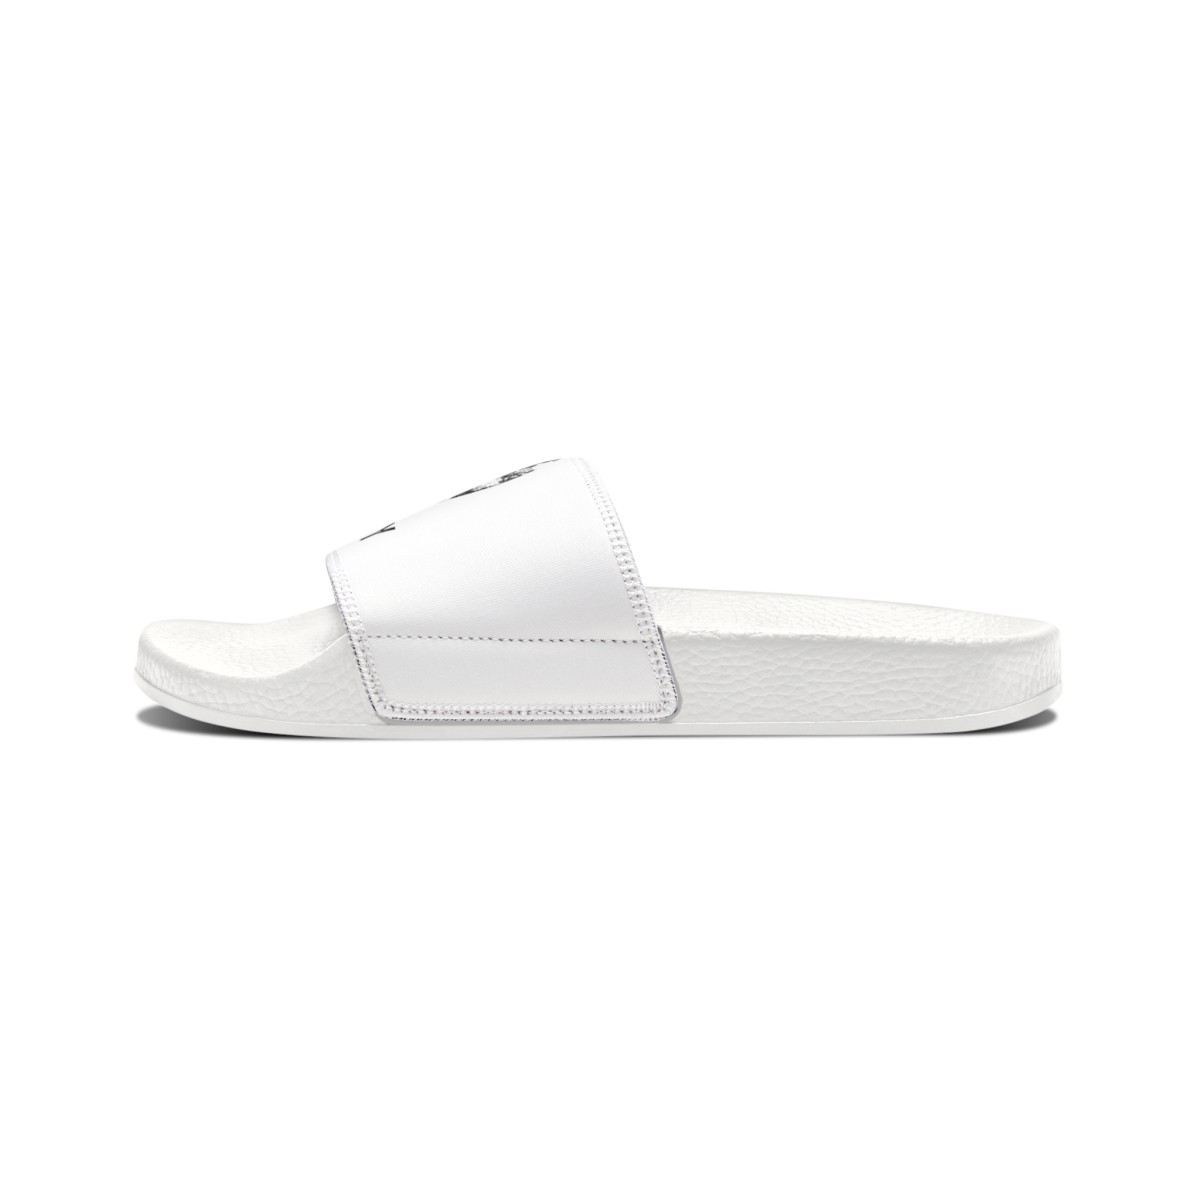 Trinity Cymbals Men's Slide Sandals product thumbnail image